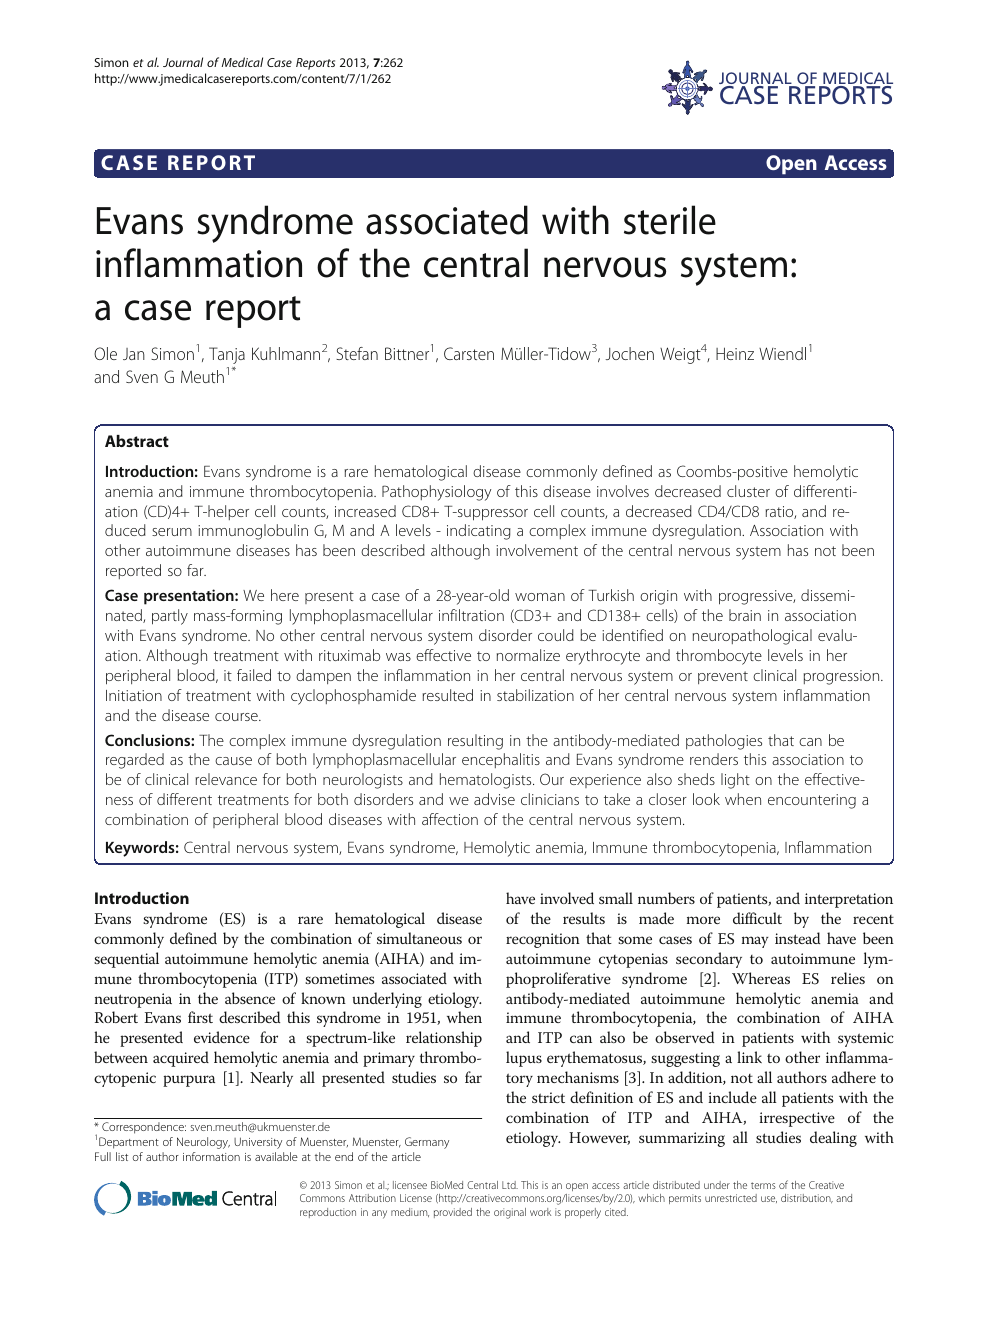 evans syndrome